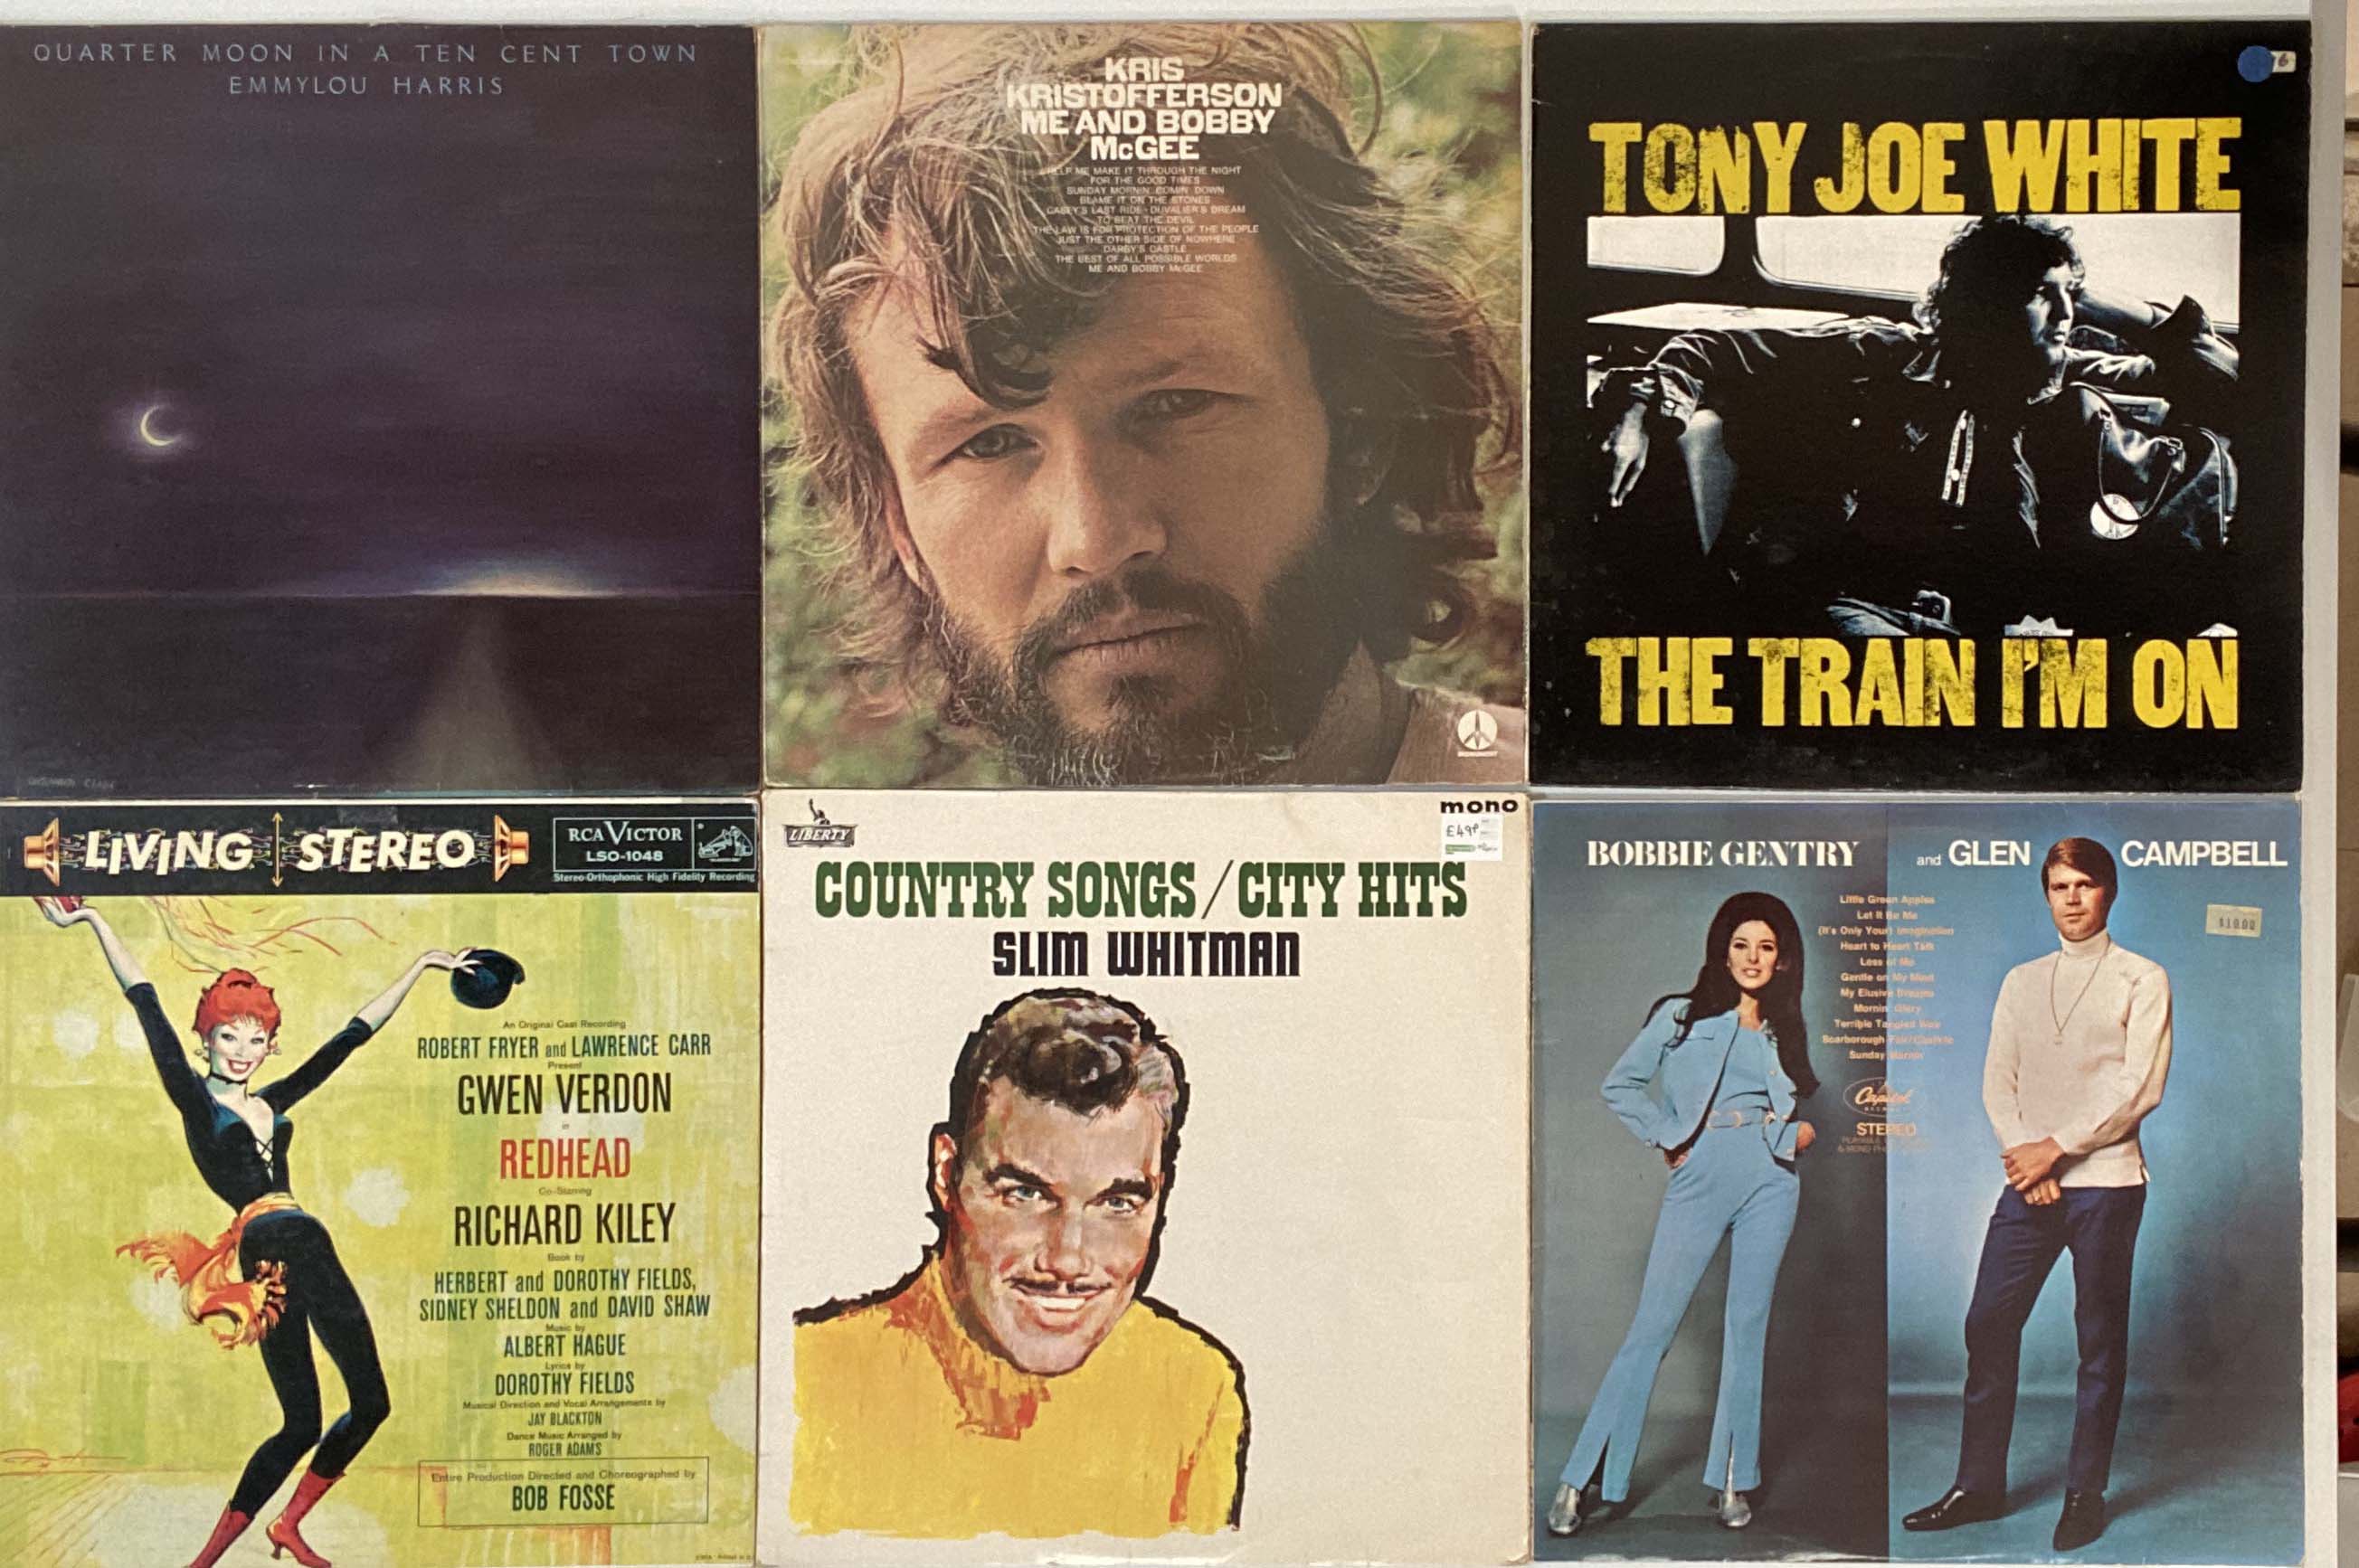 TORCH/SOUNDTRACK/RAT PACK/EXOTICA/COMEDY/COUNTRY/EASY - LPs. - Image 6 of 6